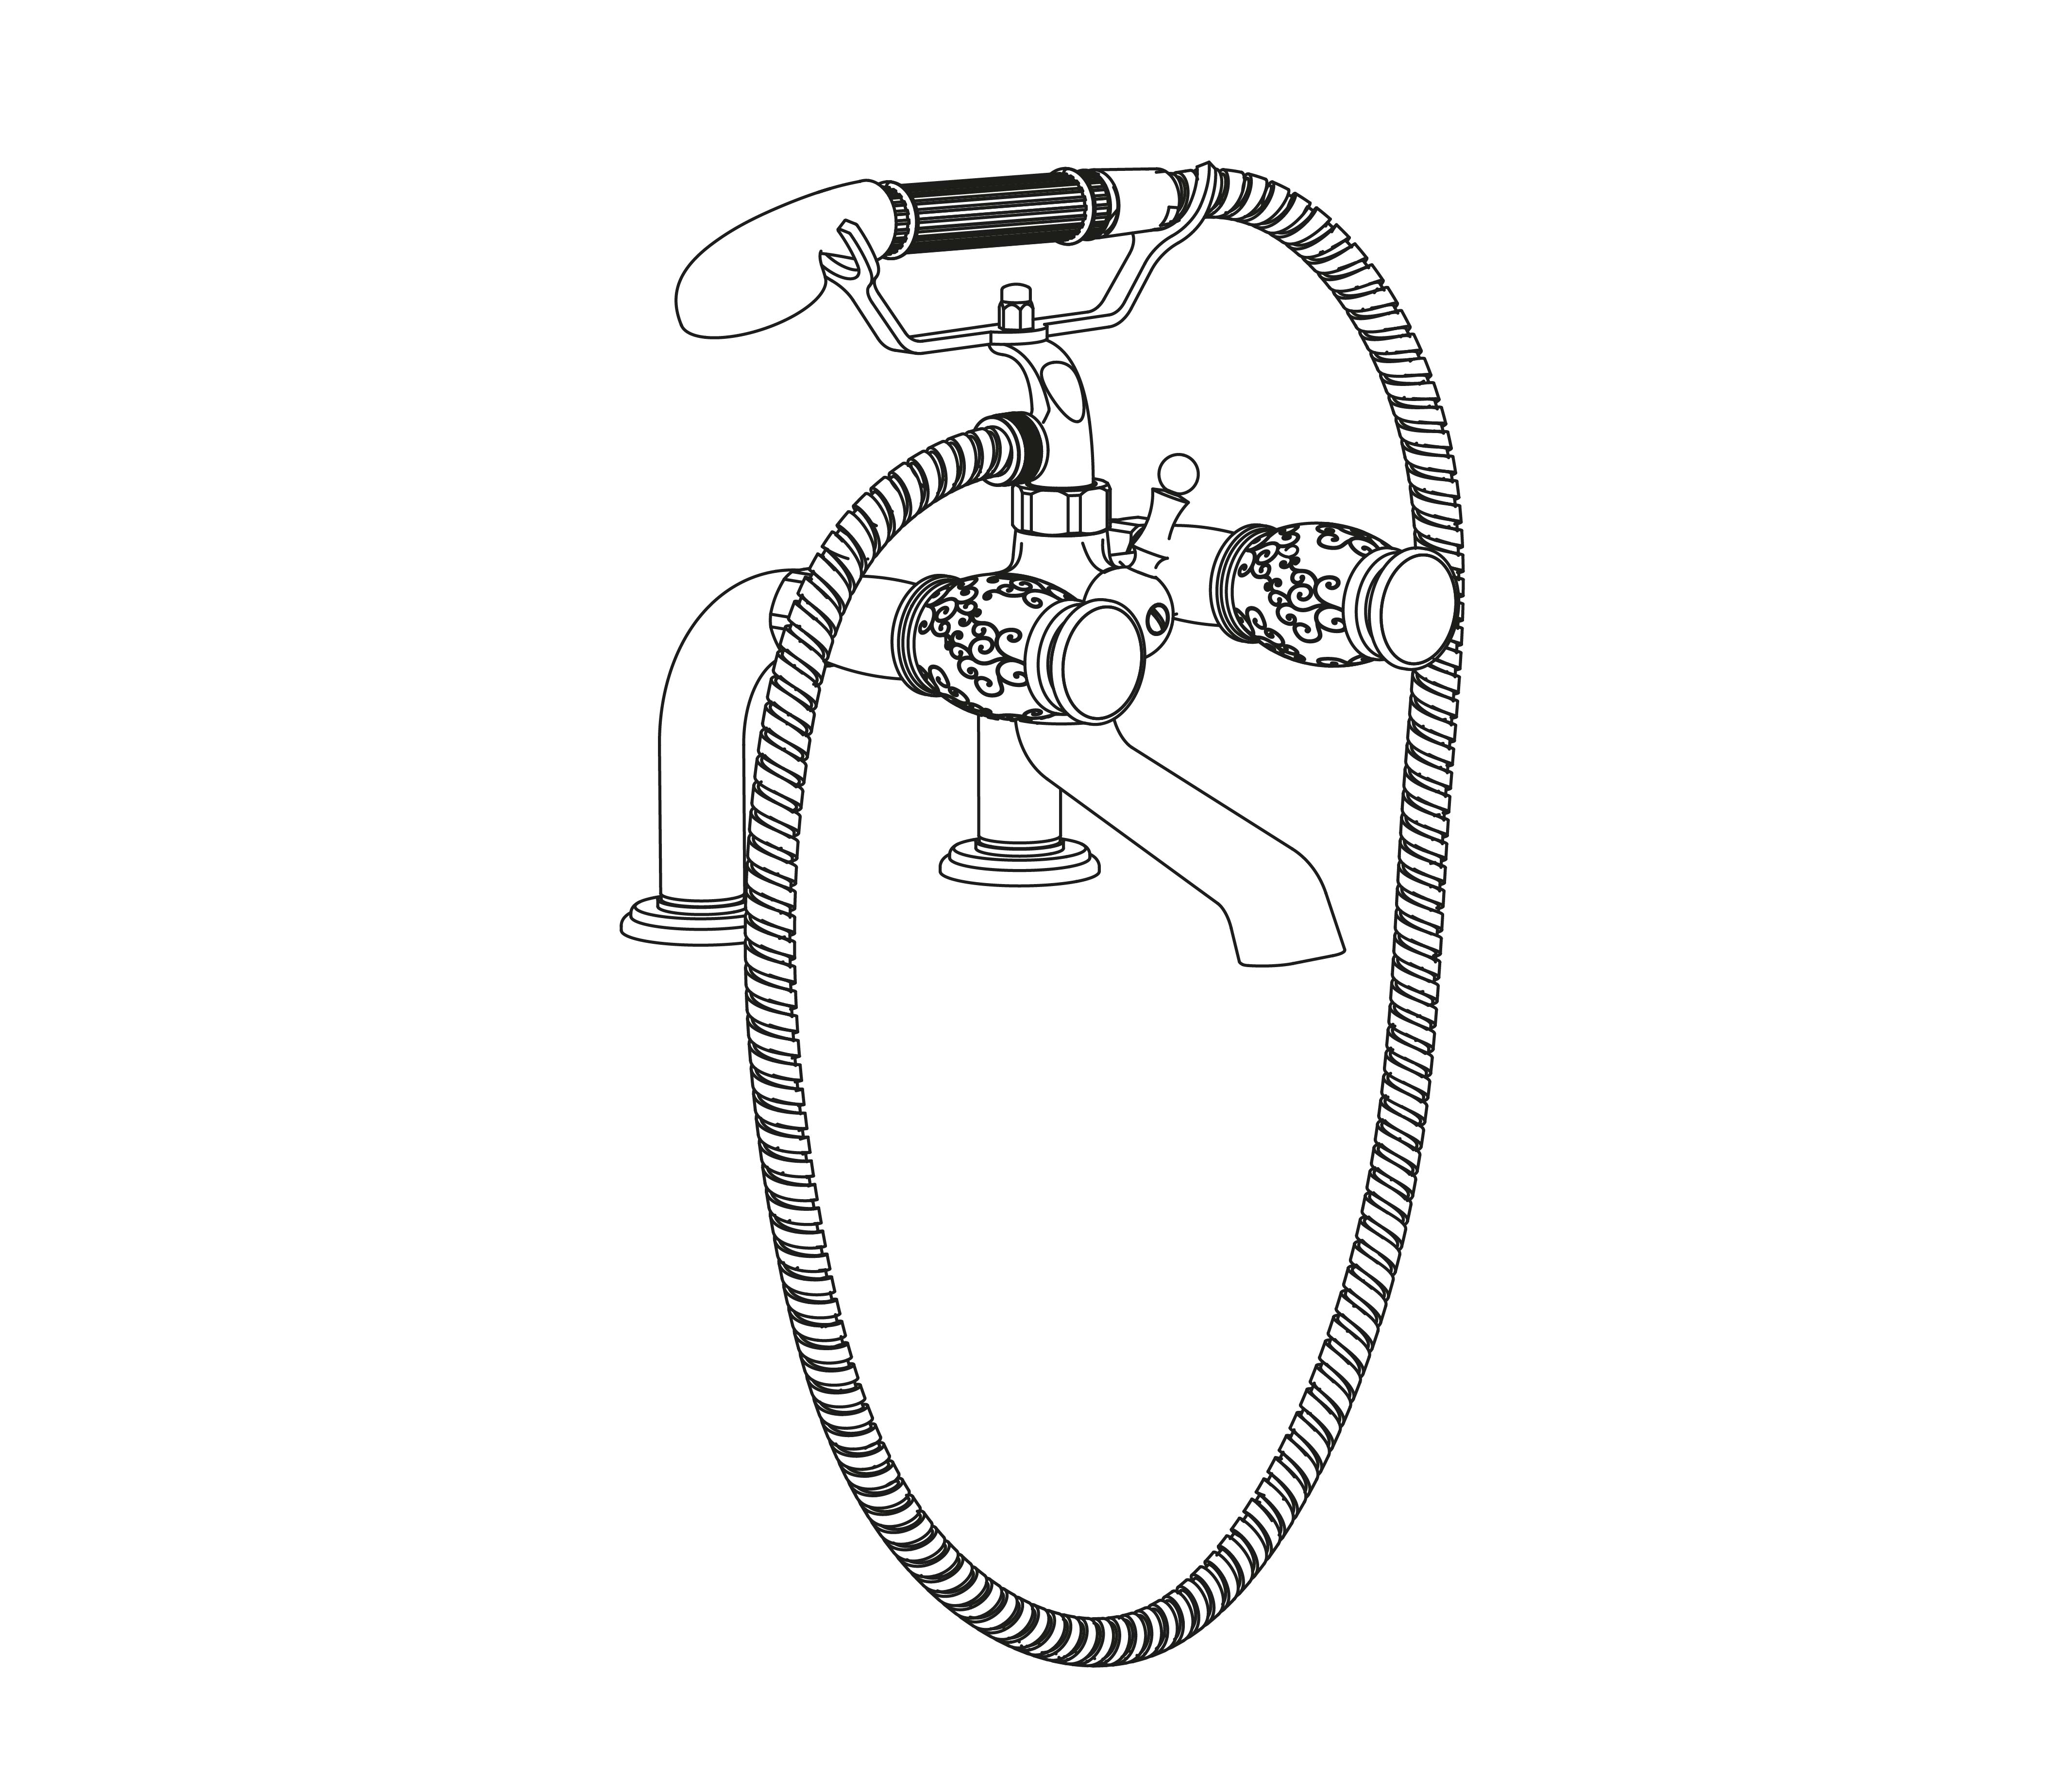 S177-3306 Rim mounted bath and shower mixer